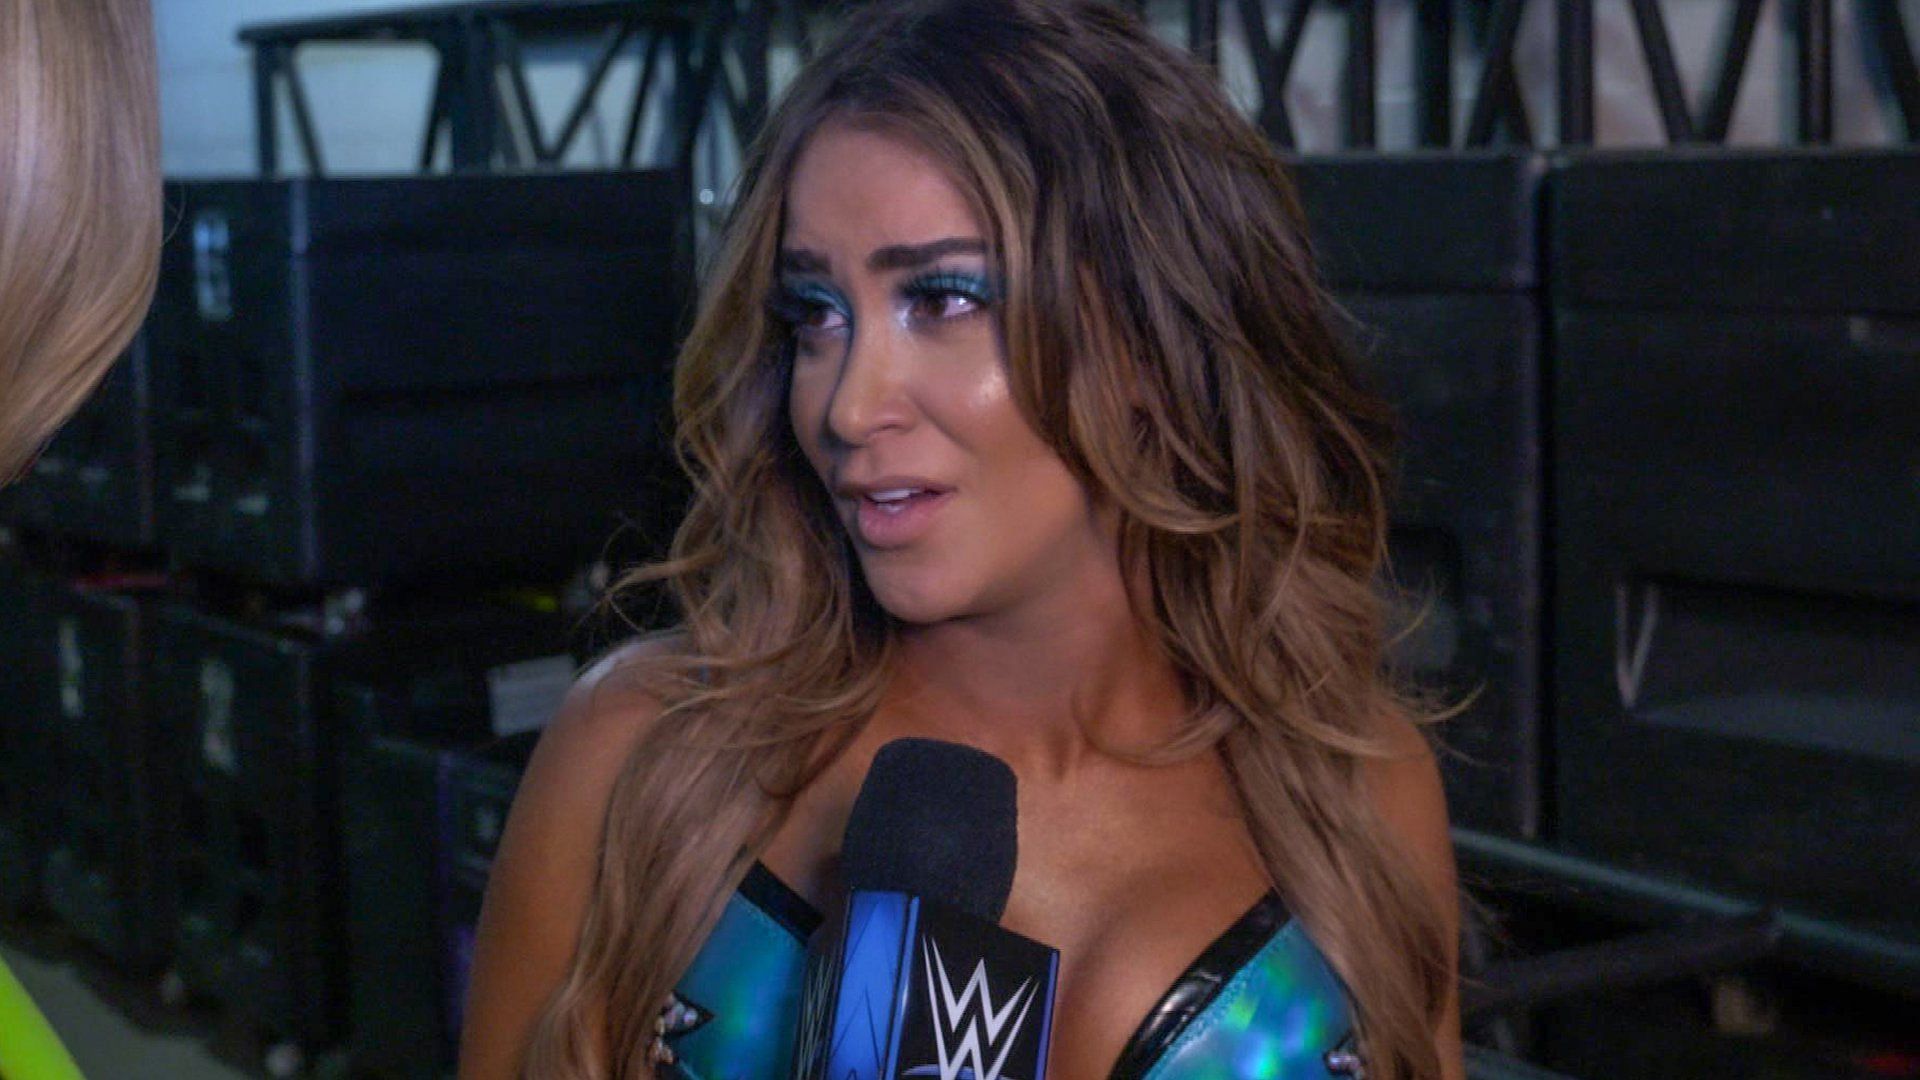 Aliyah could be returning soon